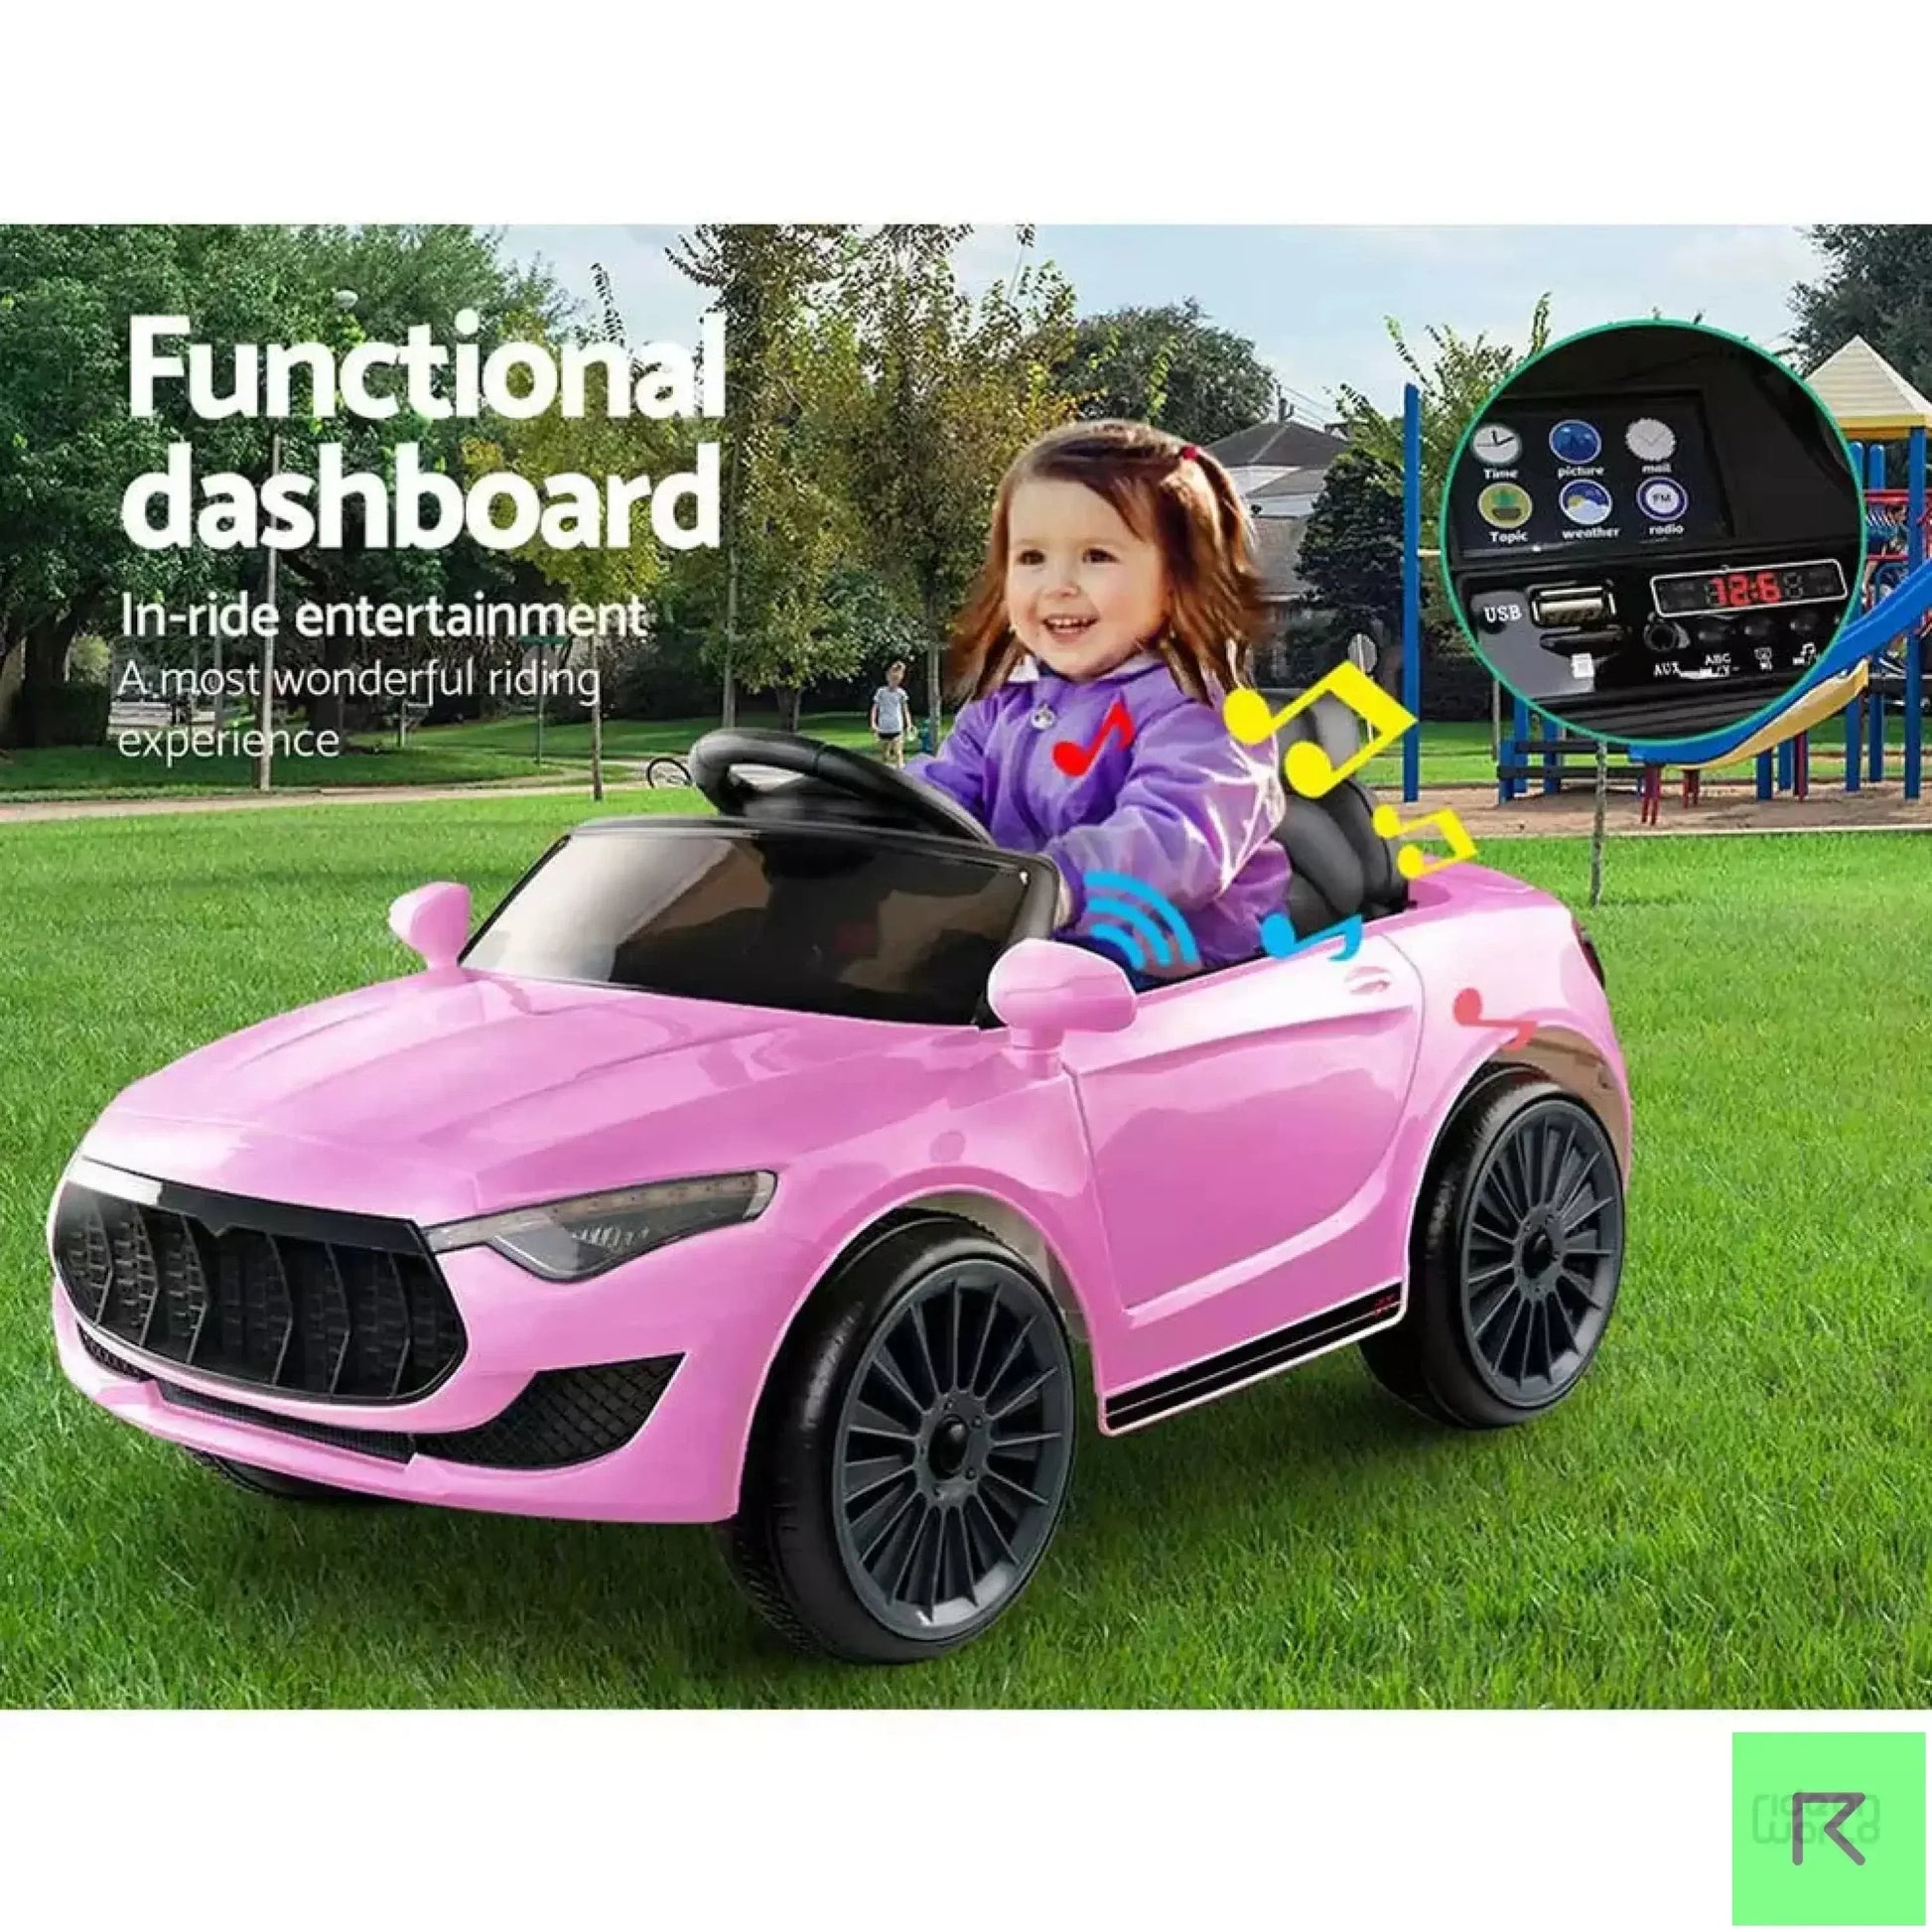 ROW KIDS Kids Ride On Car Battery Electric Toy Remote Control Pink Cars Dual Motor